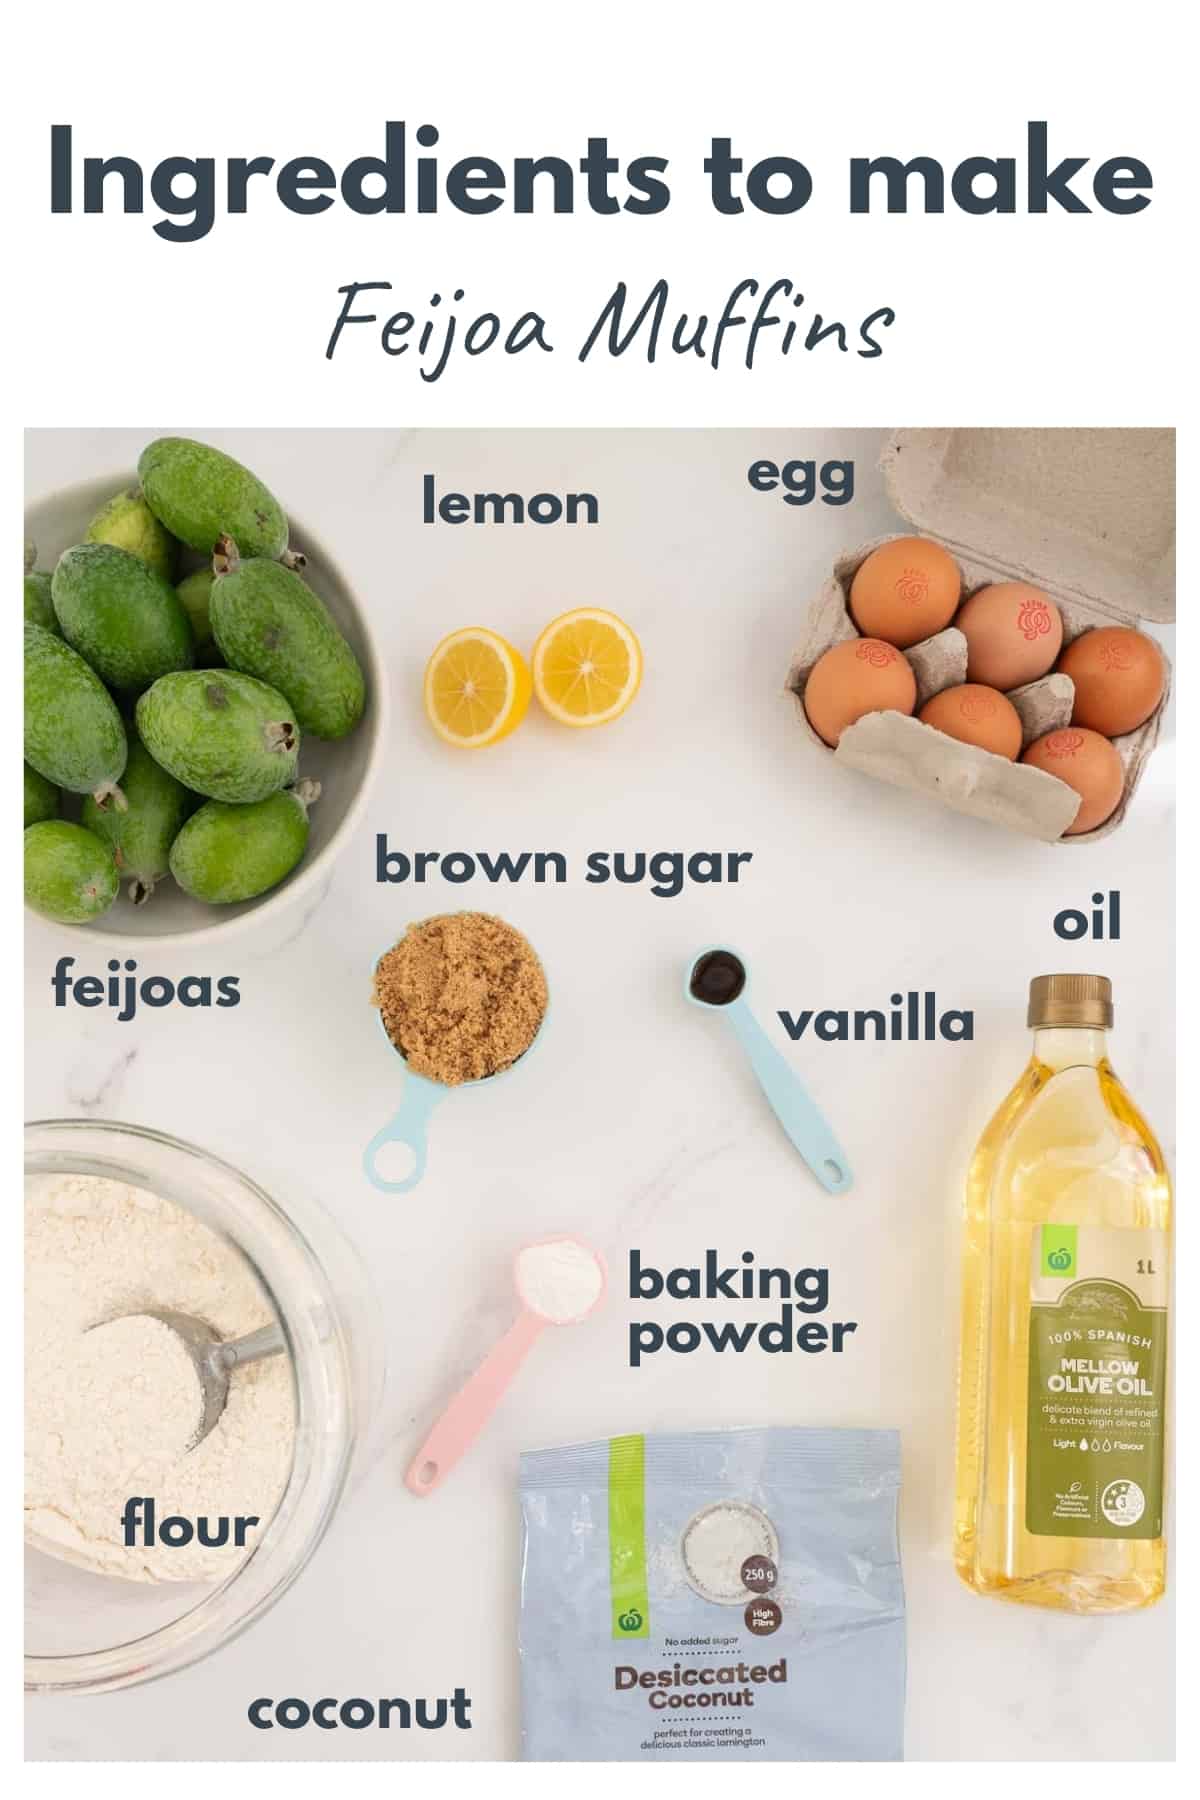 ingredients to make feijoa muffins laid out on a bench top with text overlay.